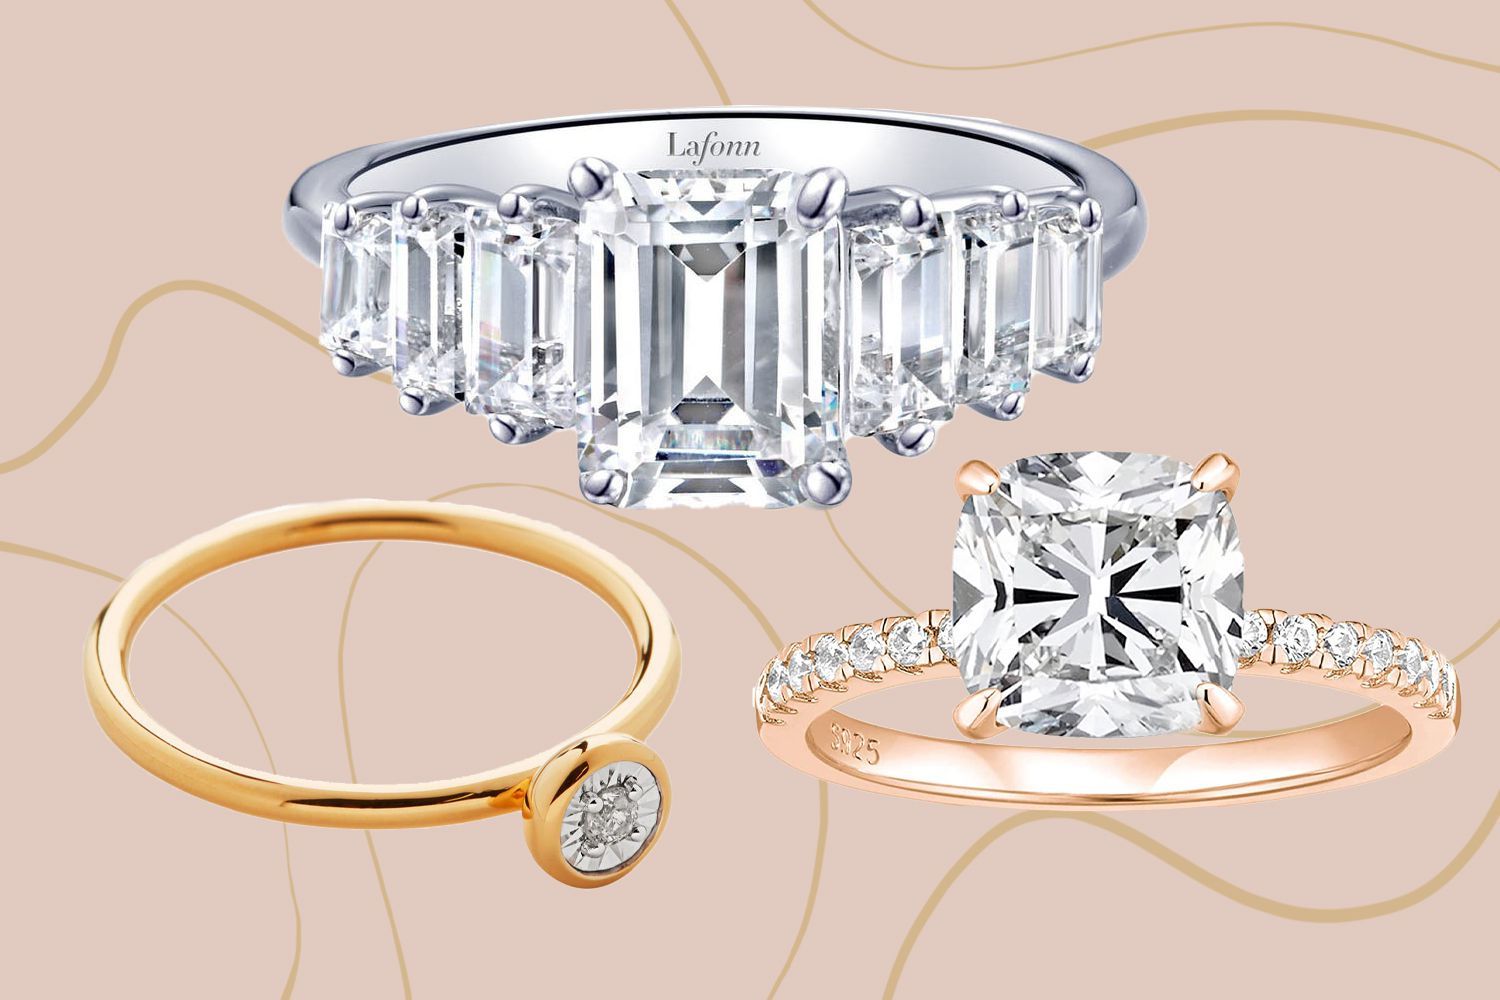 The Best Fake Engagement Rings For Traveling In 2022 |travel + Leisure Regarding Floating Squares Diamond Cocktail Rings (View 19 of 25)